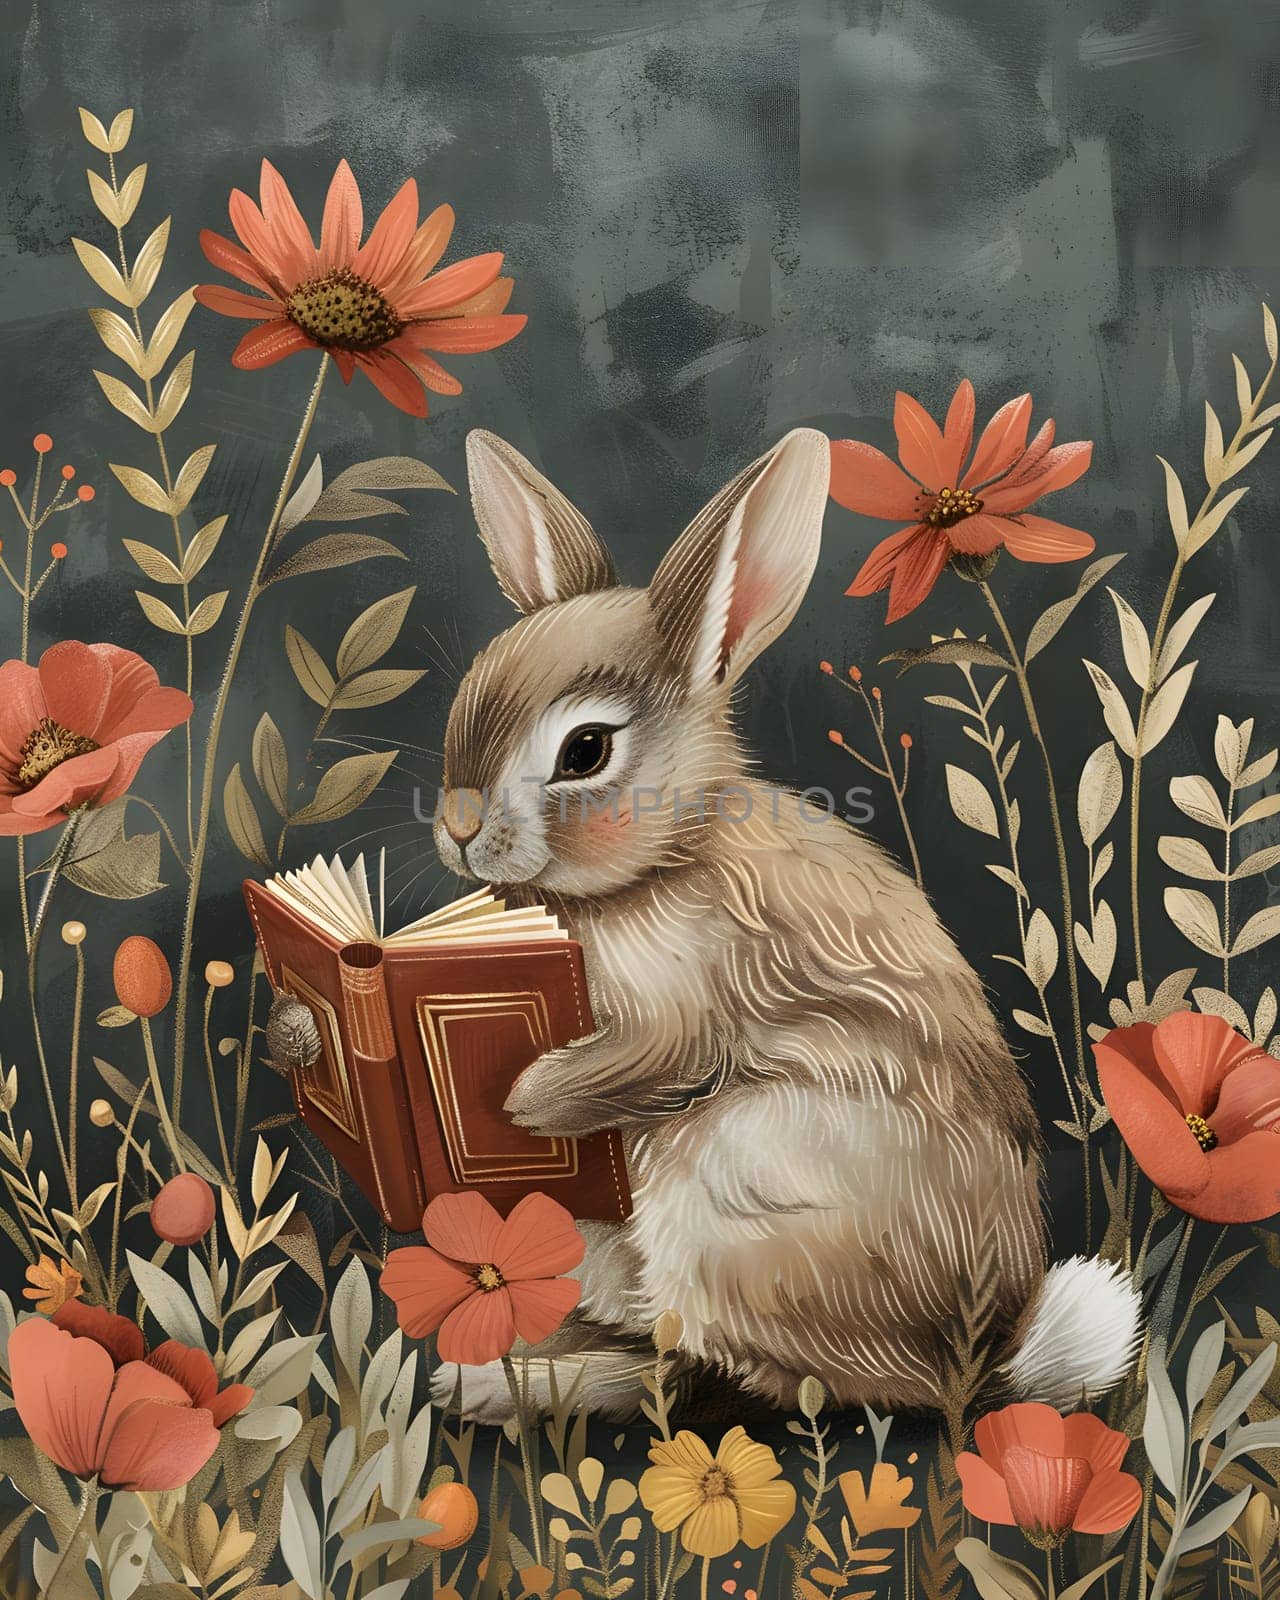 Wood rabbit reading botany book among flowers in nature by Nadtochiy